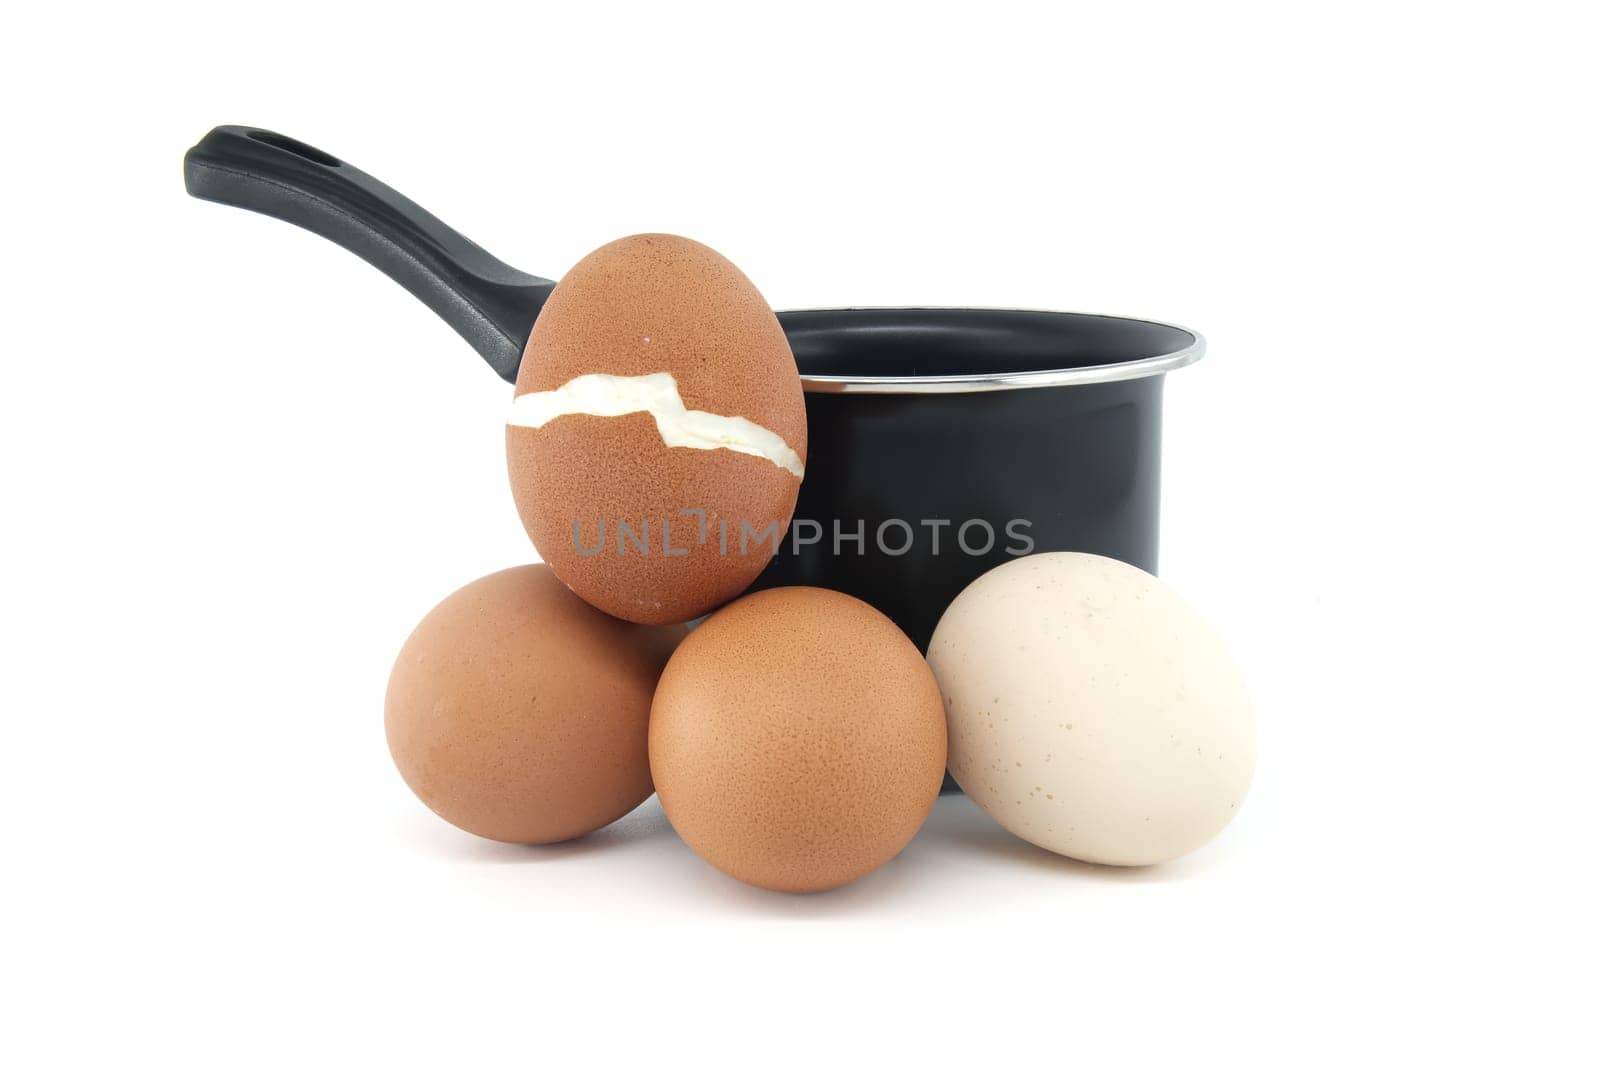 Isolated on a white background, a black cooking pot and group of hard-boiled eggs, one of which has broken during boiling